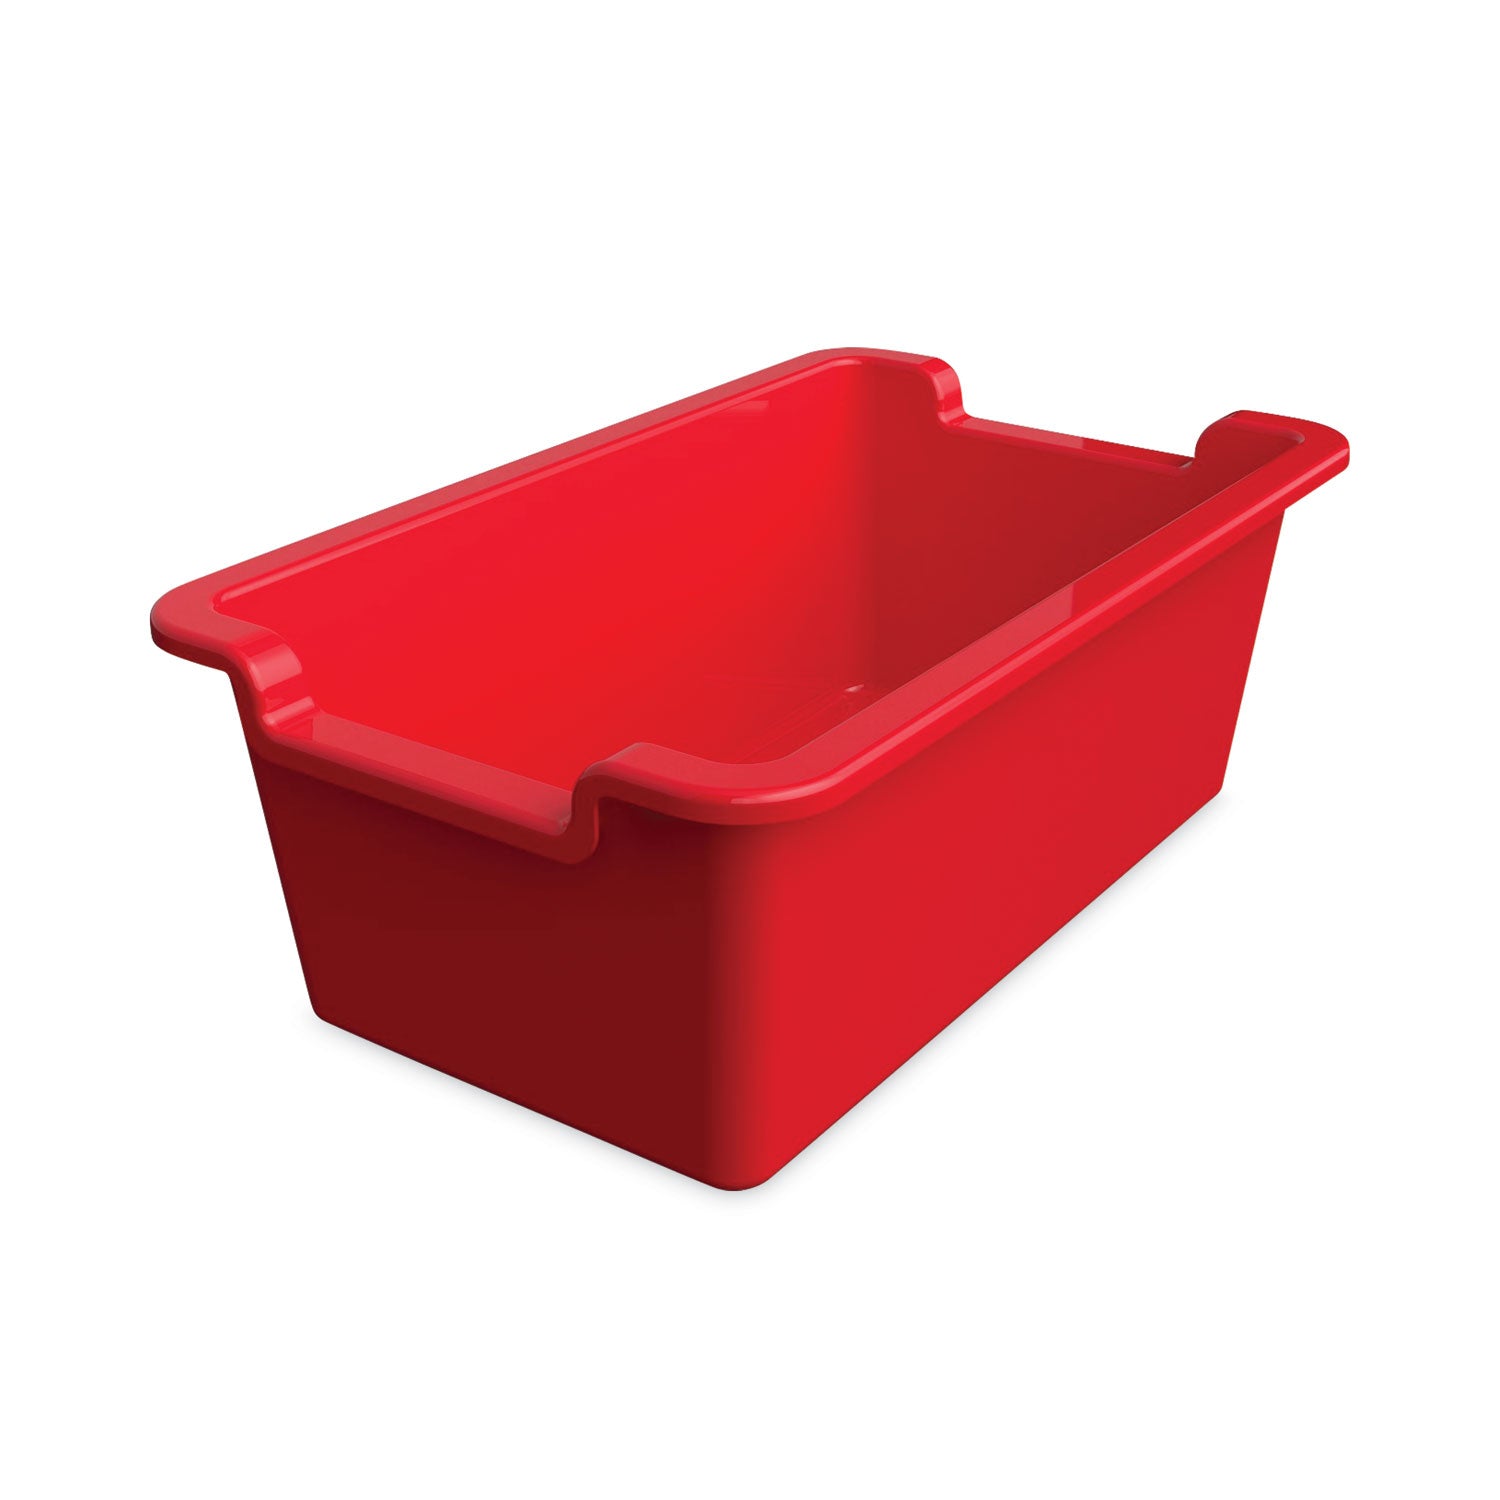 antimicrobial-rectangle-storage-bin-red_def39510red - 2